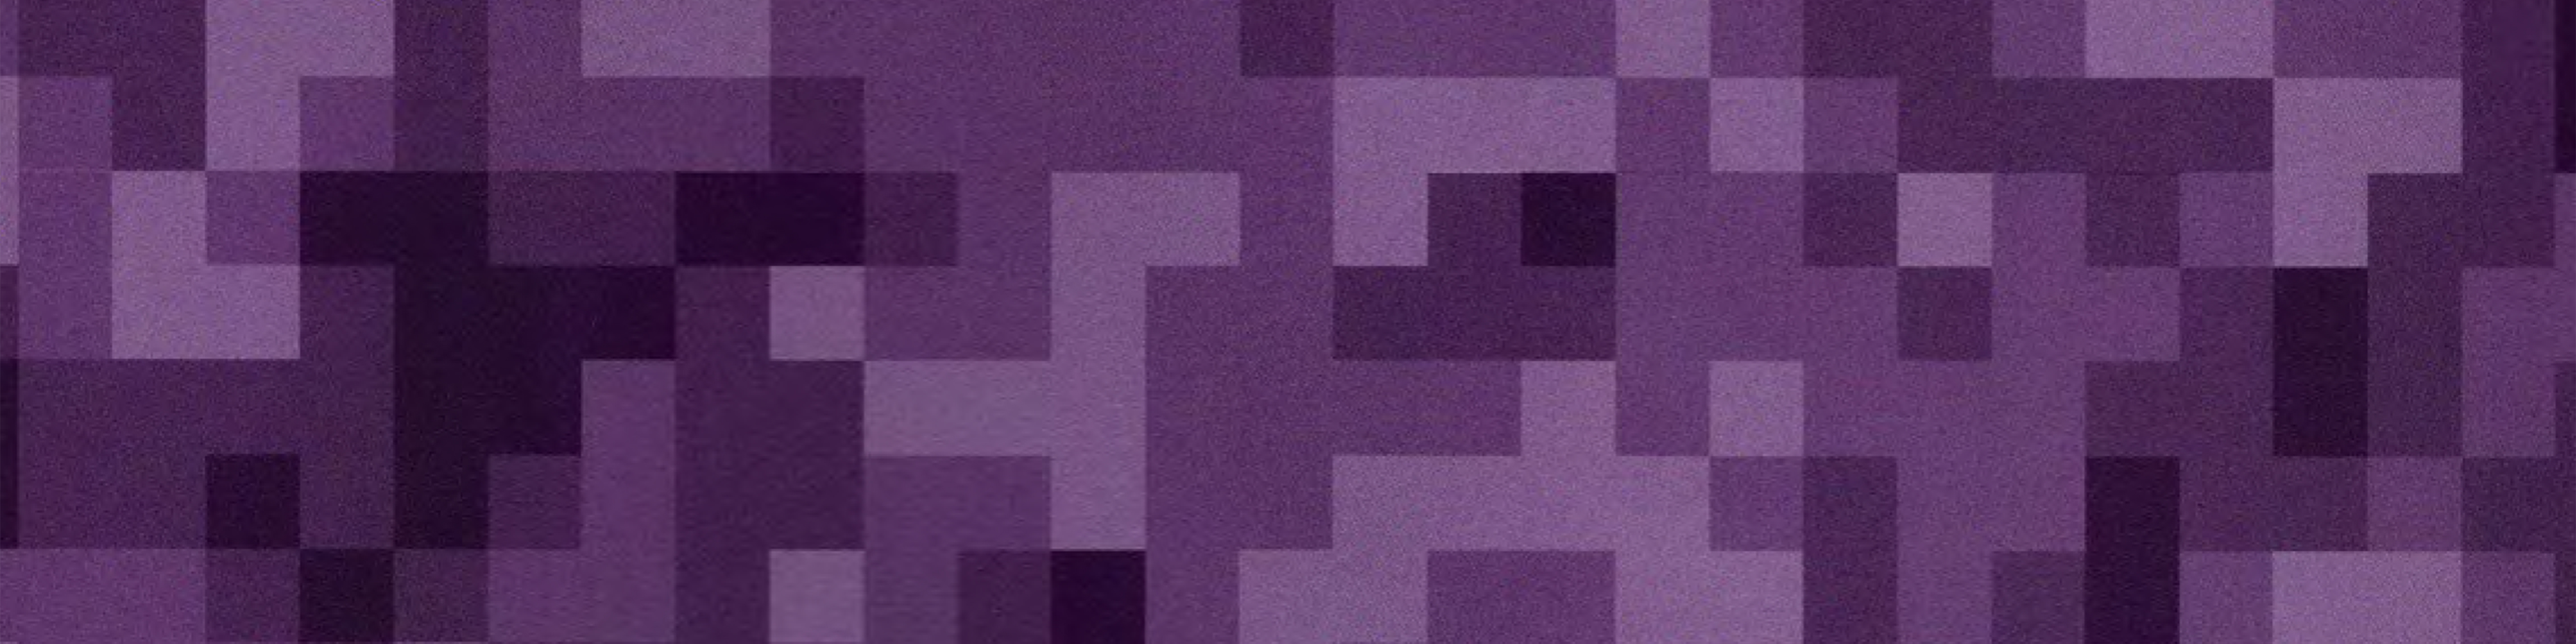 Abstract blocky purple, lilac, and black patter, like digital camouflage